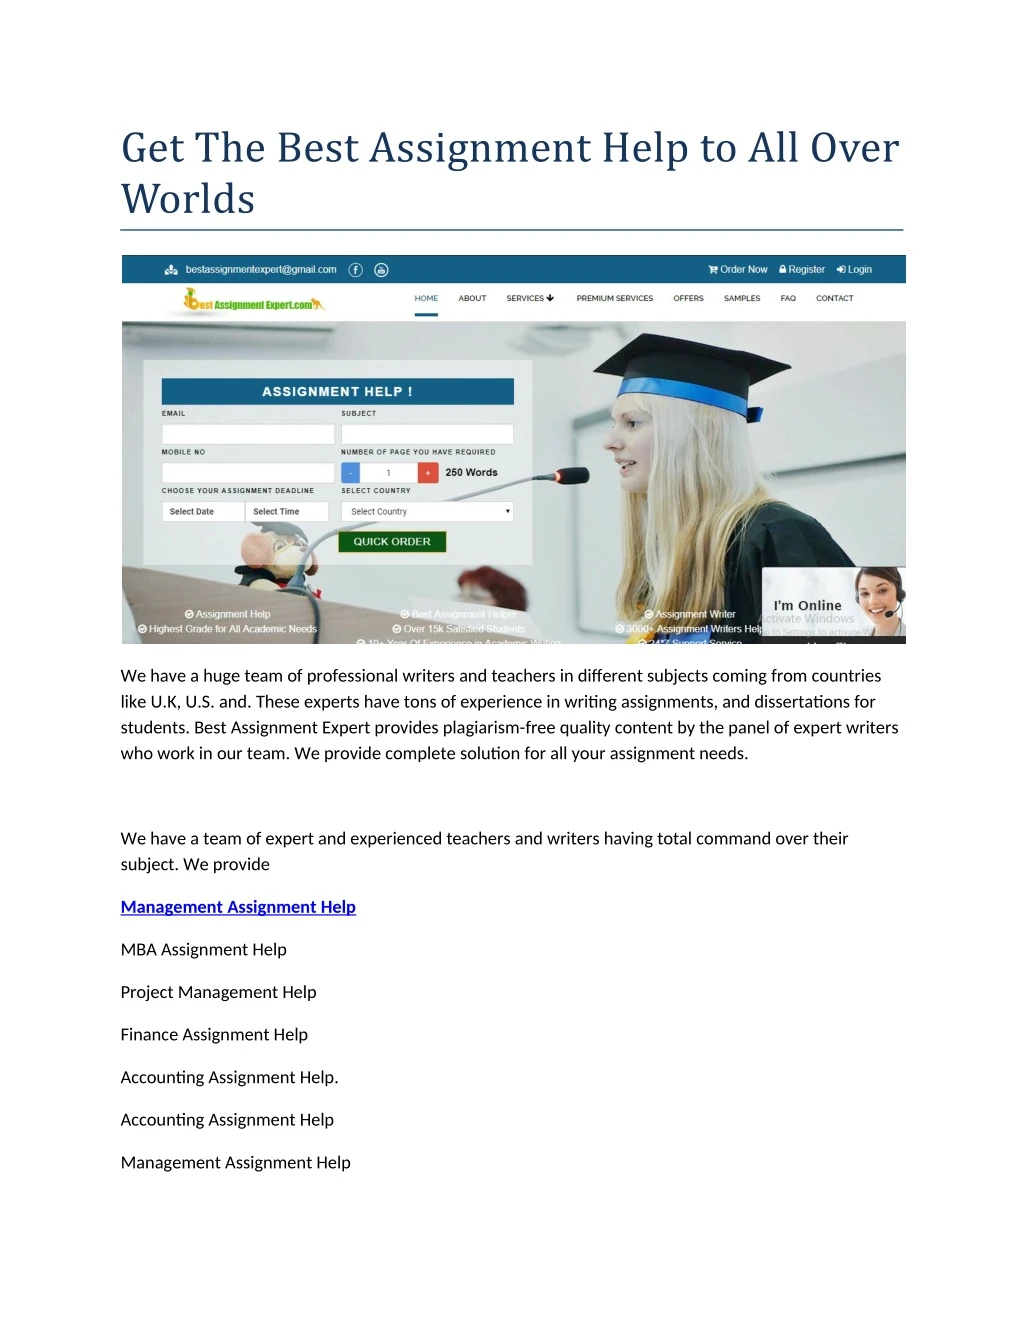 get the best assignment help to all over worlds